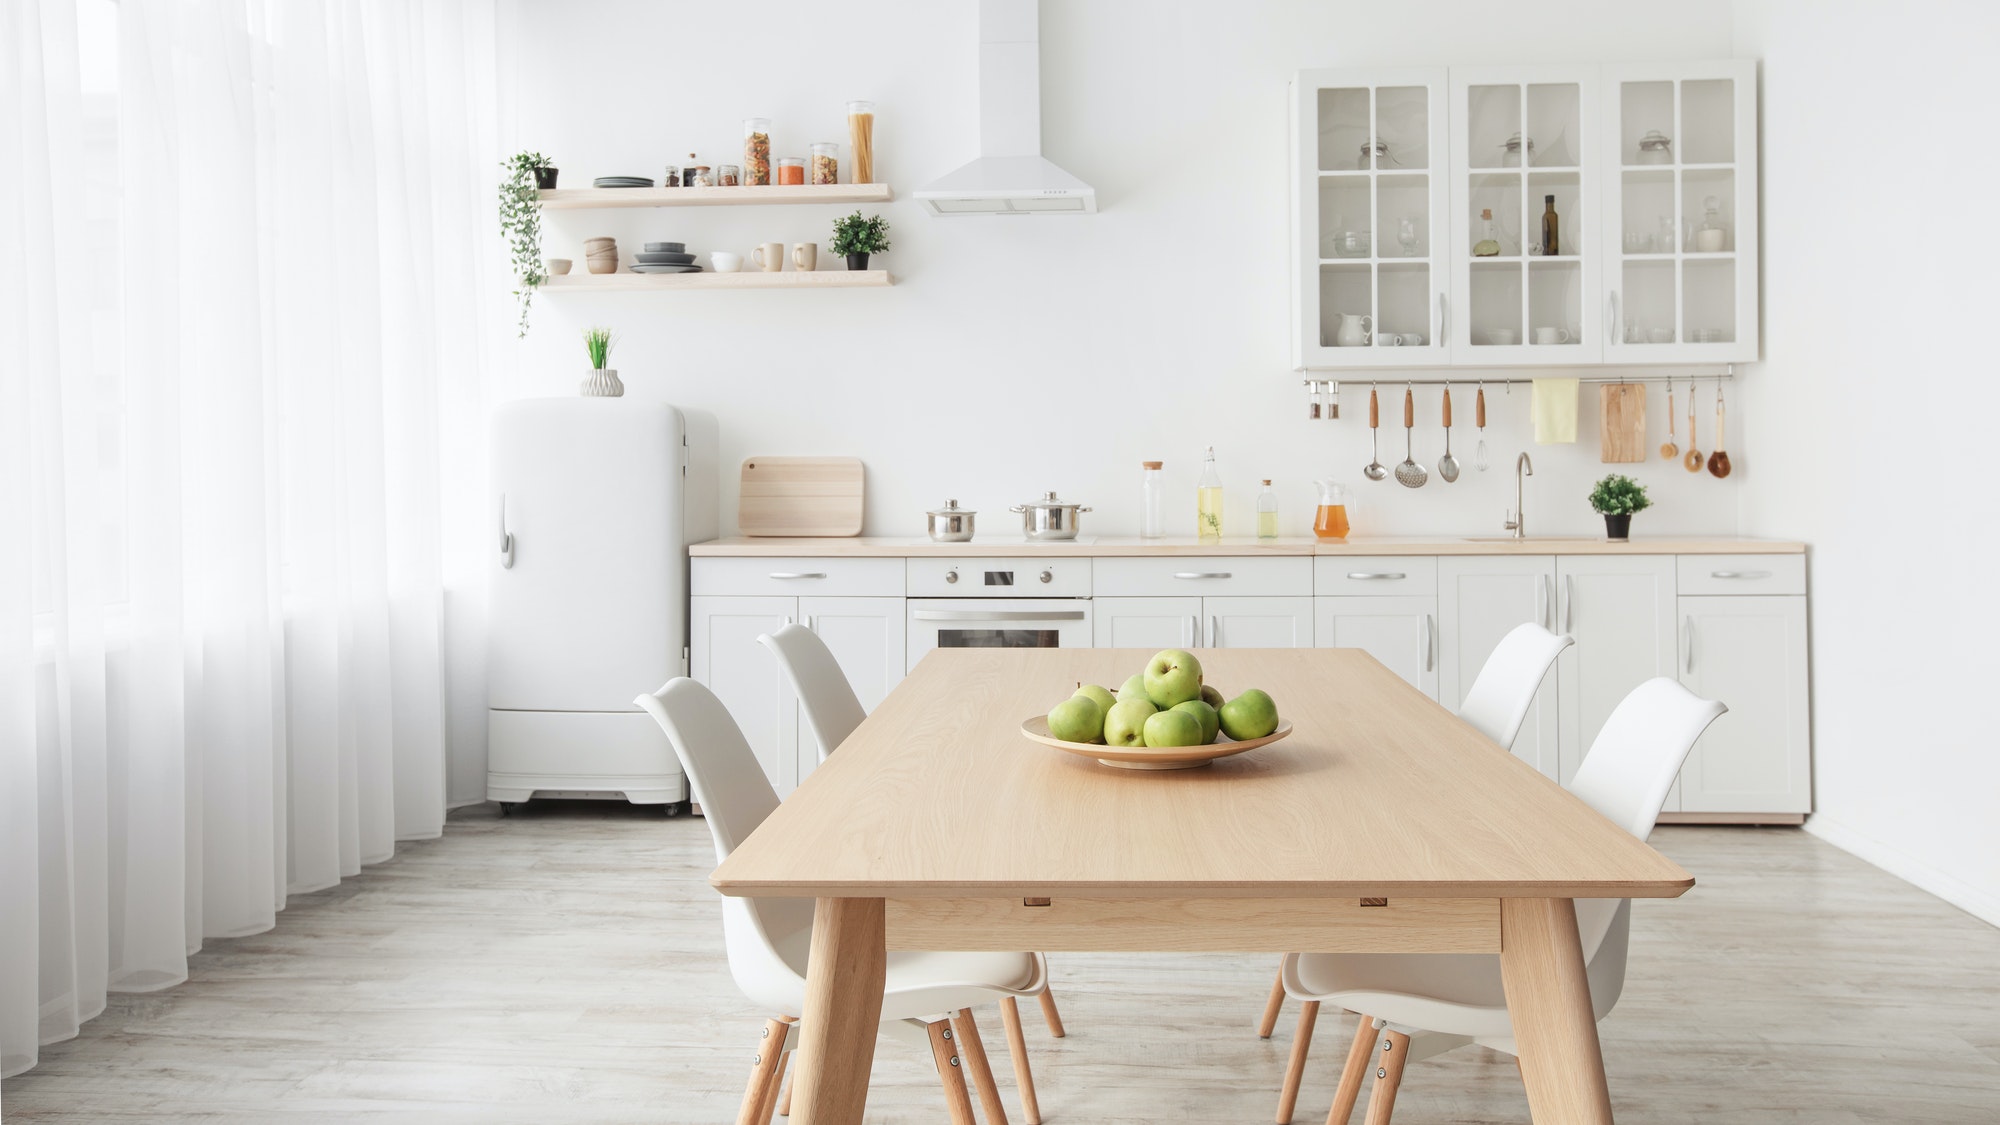 Contemporary minimalist interior of kitchen and dining room. White furniture with utensils and